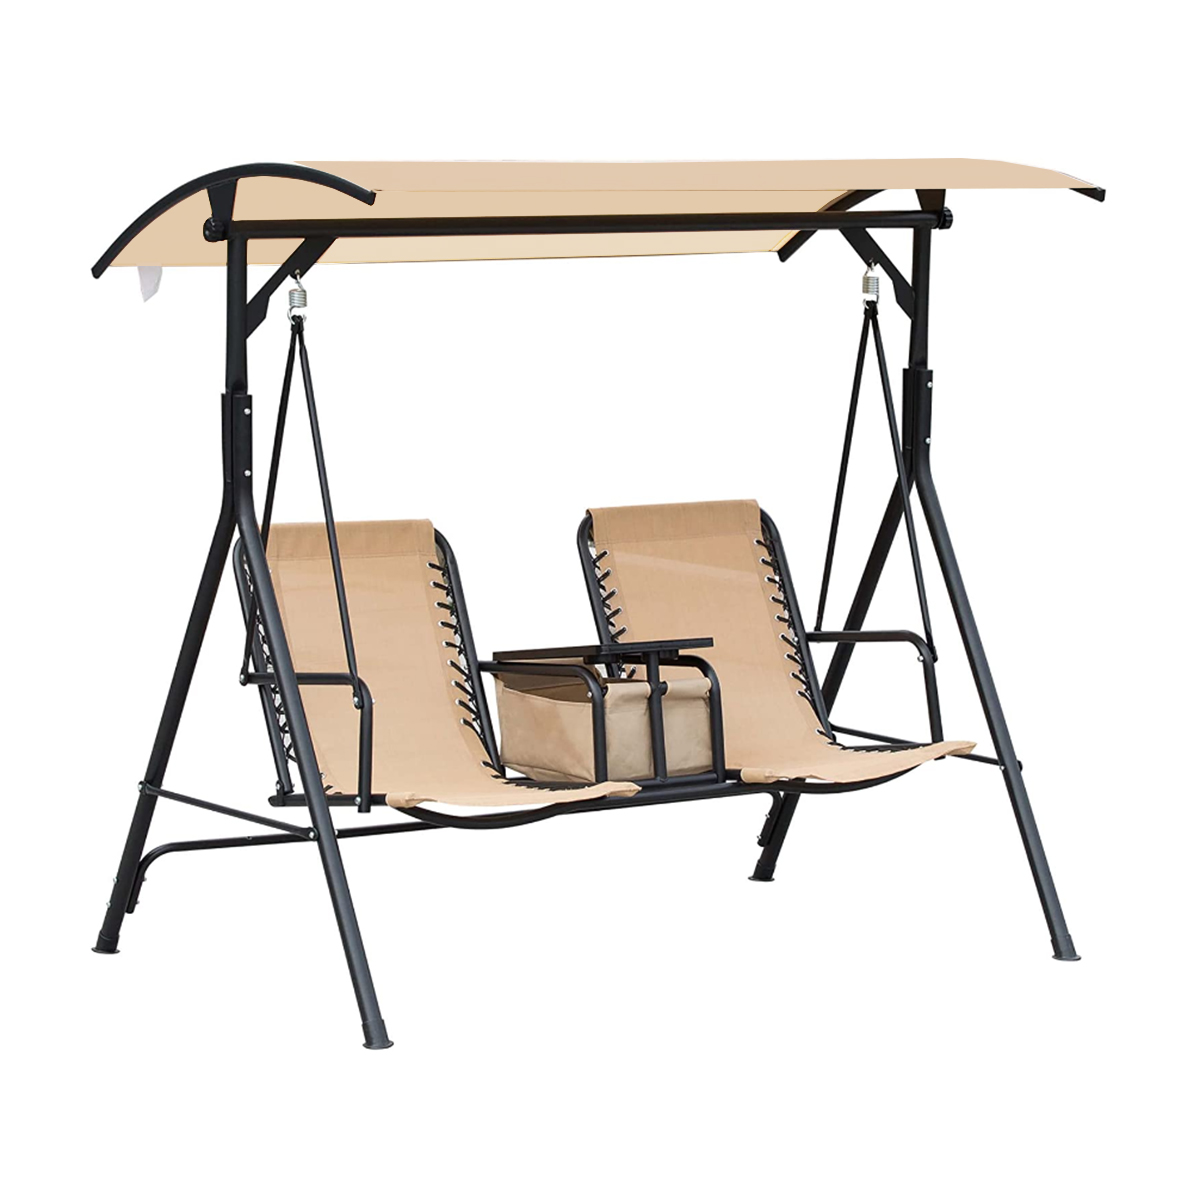 Replacement Canopy for Outsunny 2 Glider Swing - RipLock 350